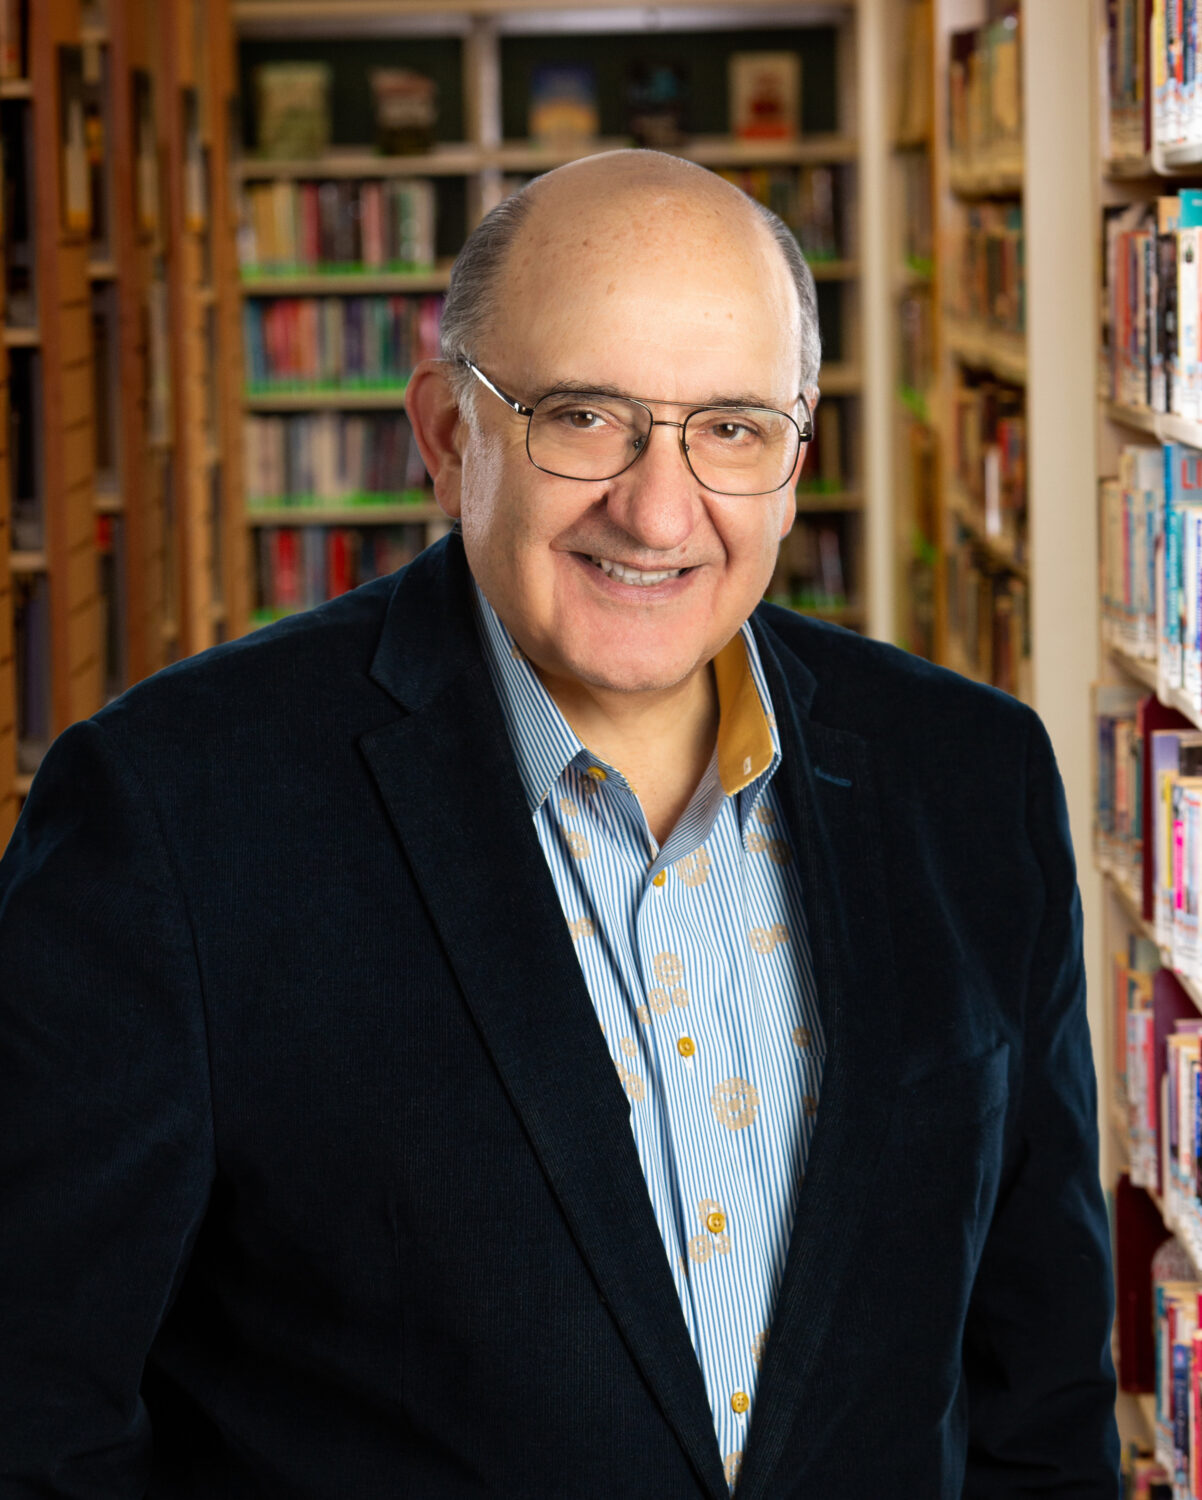 Image of a man wearing a suit coat in front of book shelves